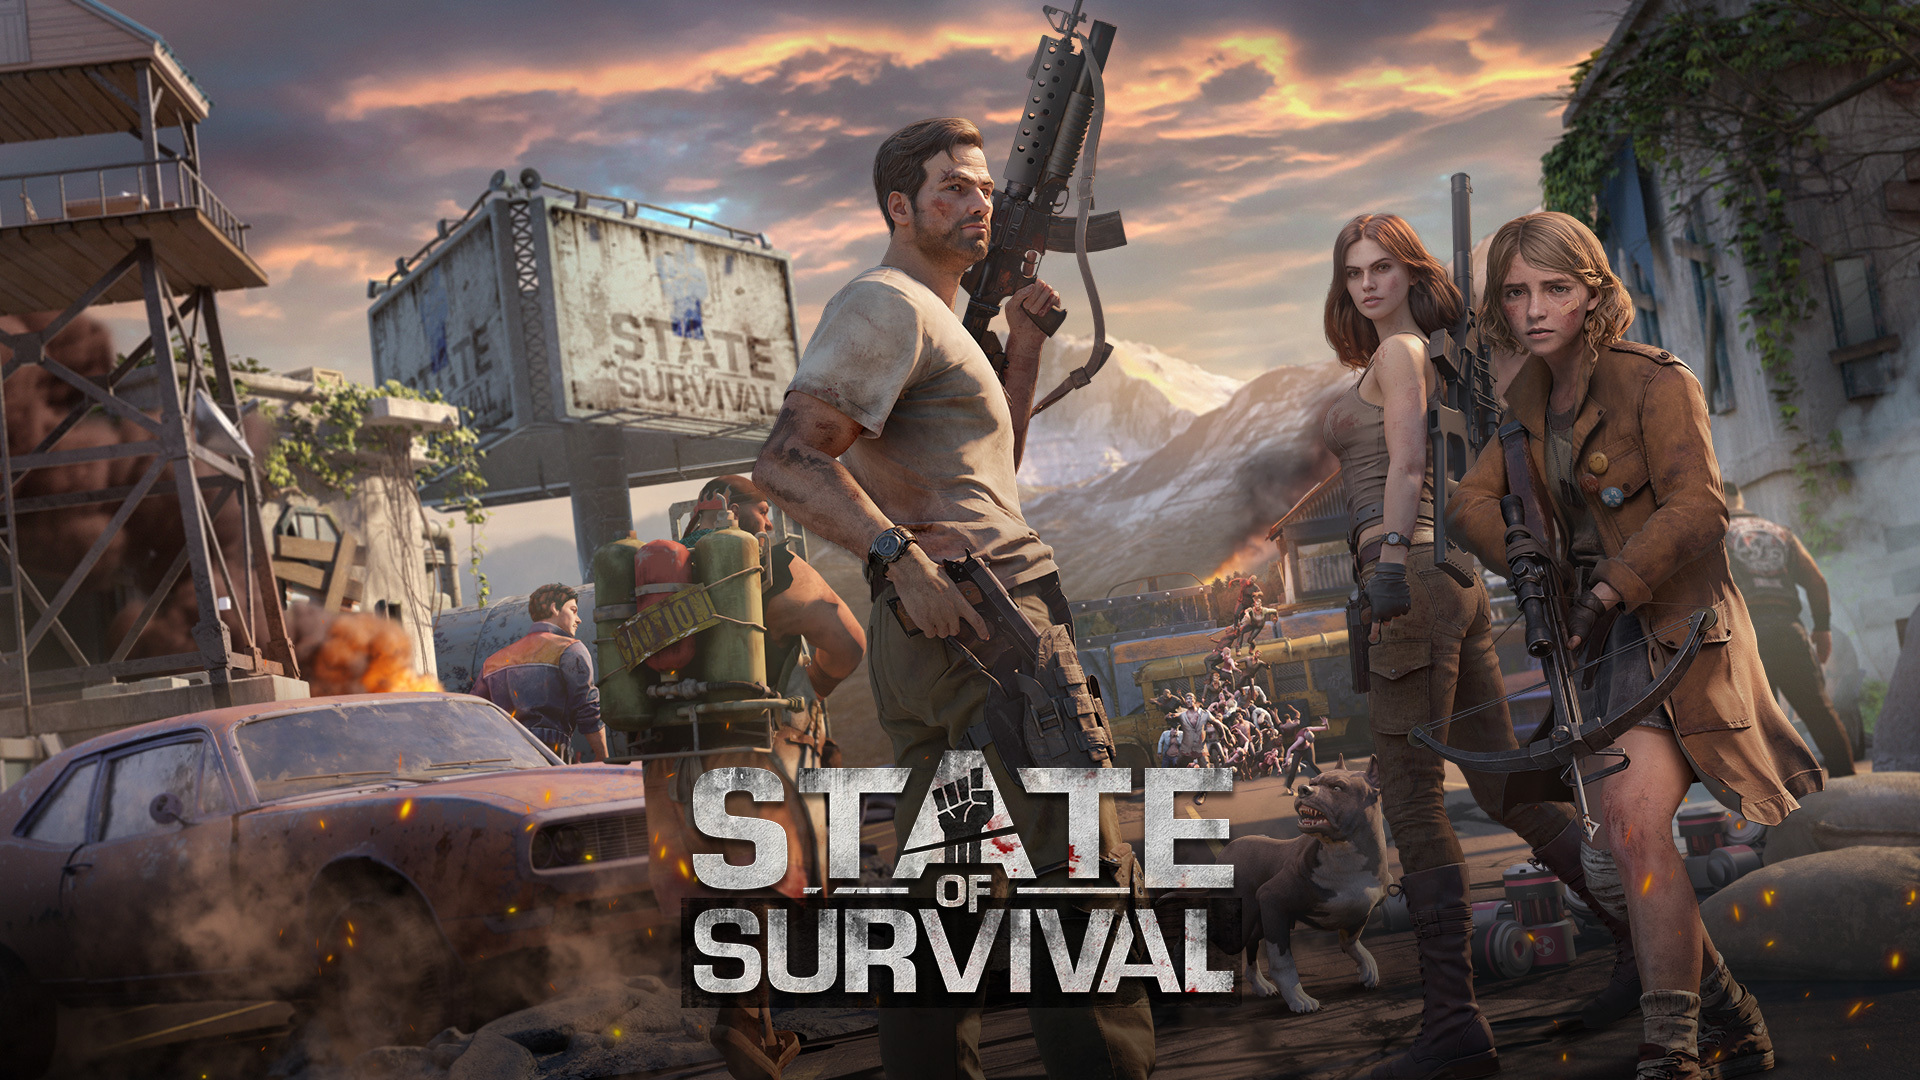 An Extraordinary First Year For Zombie Apocalypse Game State Of Survival |  Business Wire